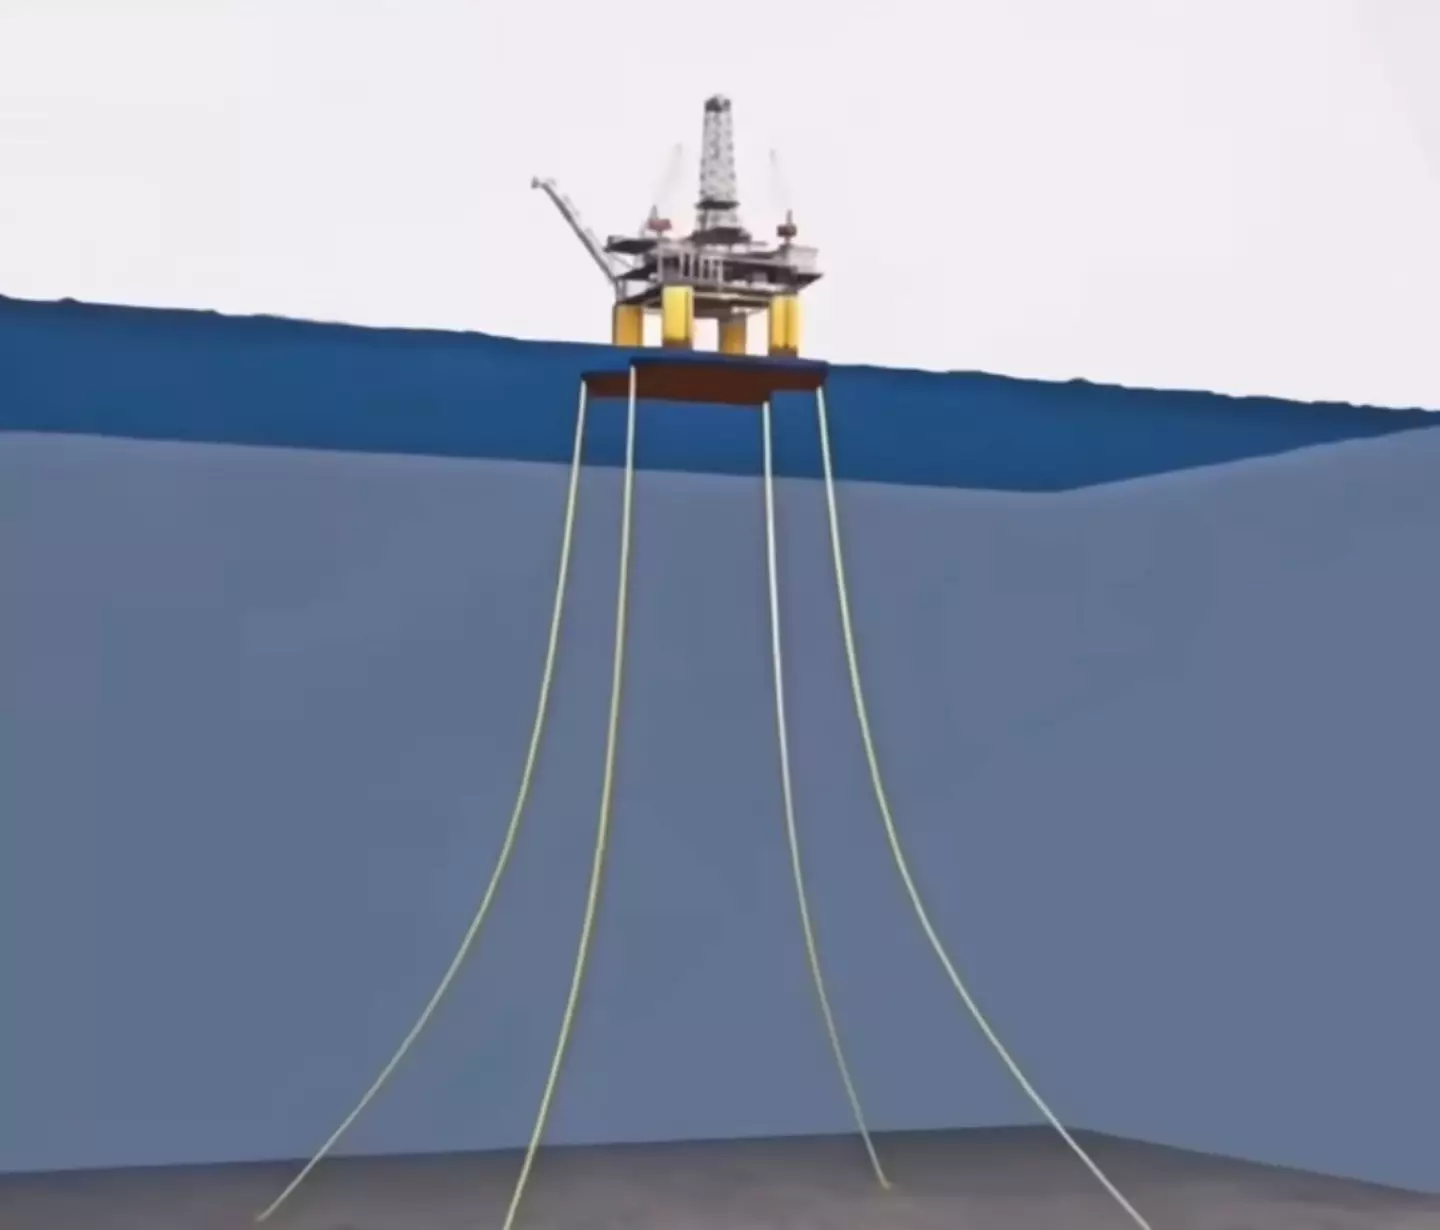 Fixed platforms have 'legs' which are embedded in the ocean floor (YouTube/jasperstorm)